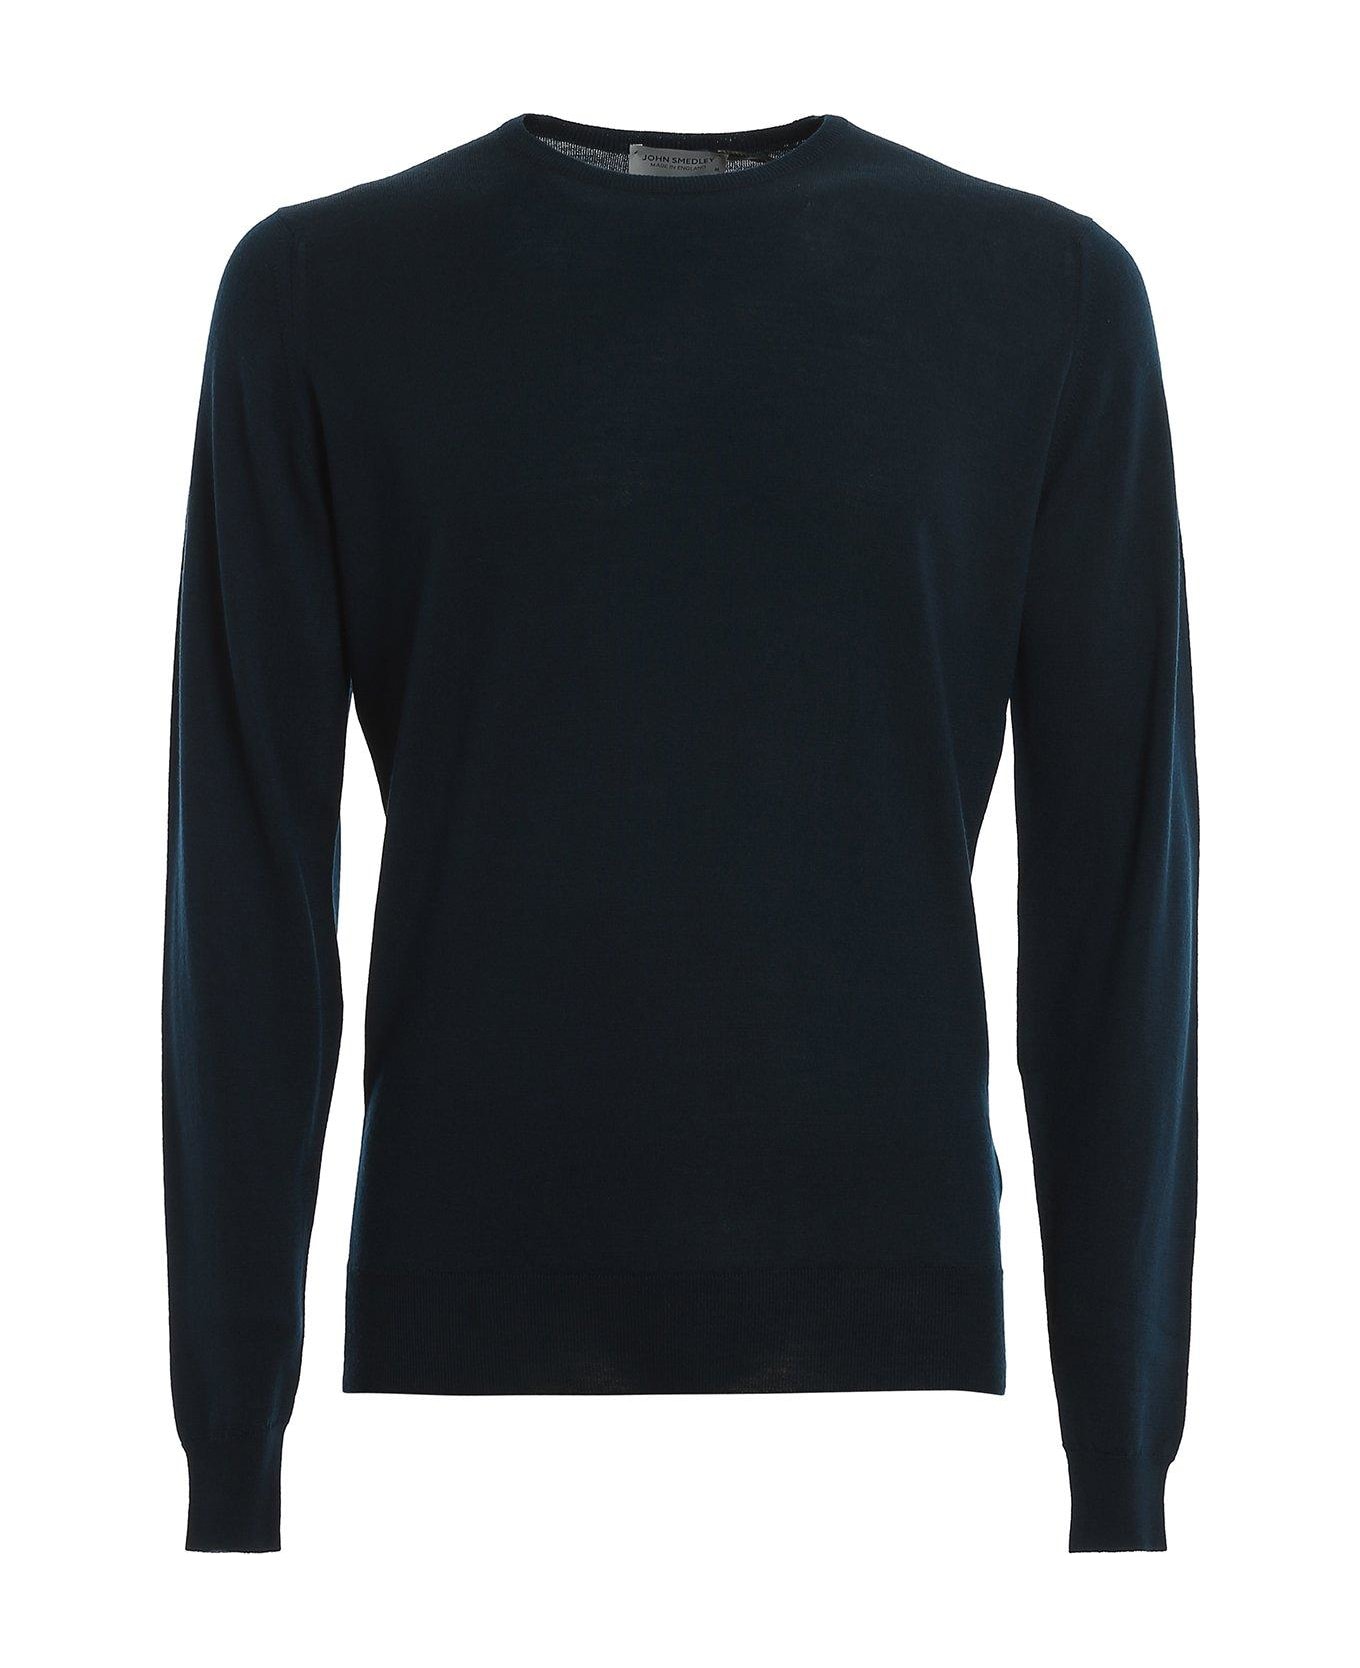 John Smedley Lundy Knitted Jumper - GREEN